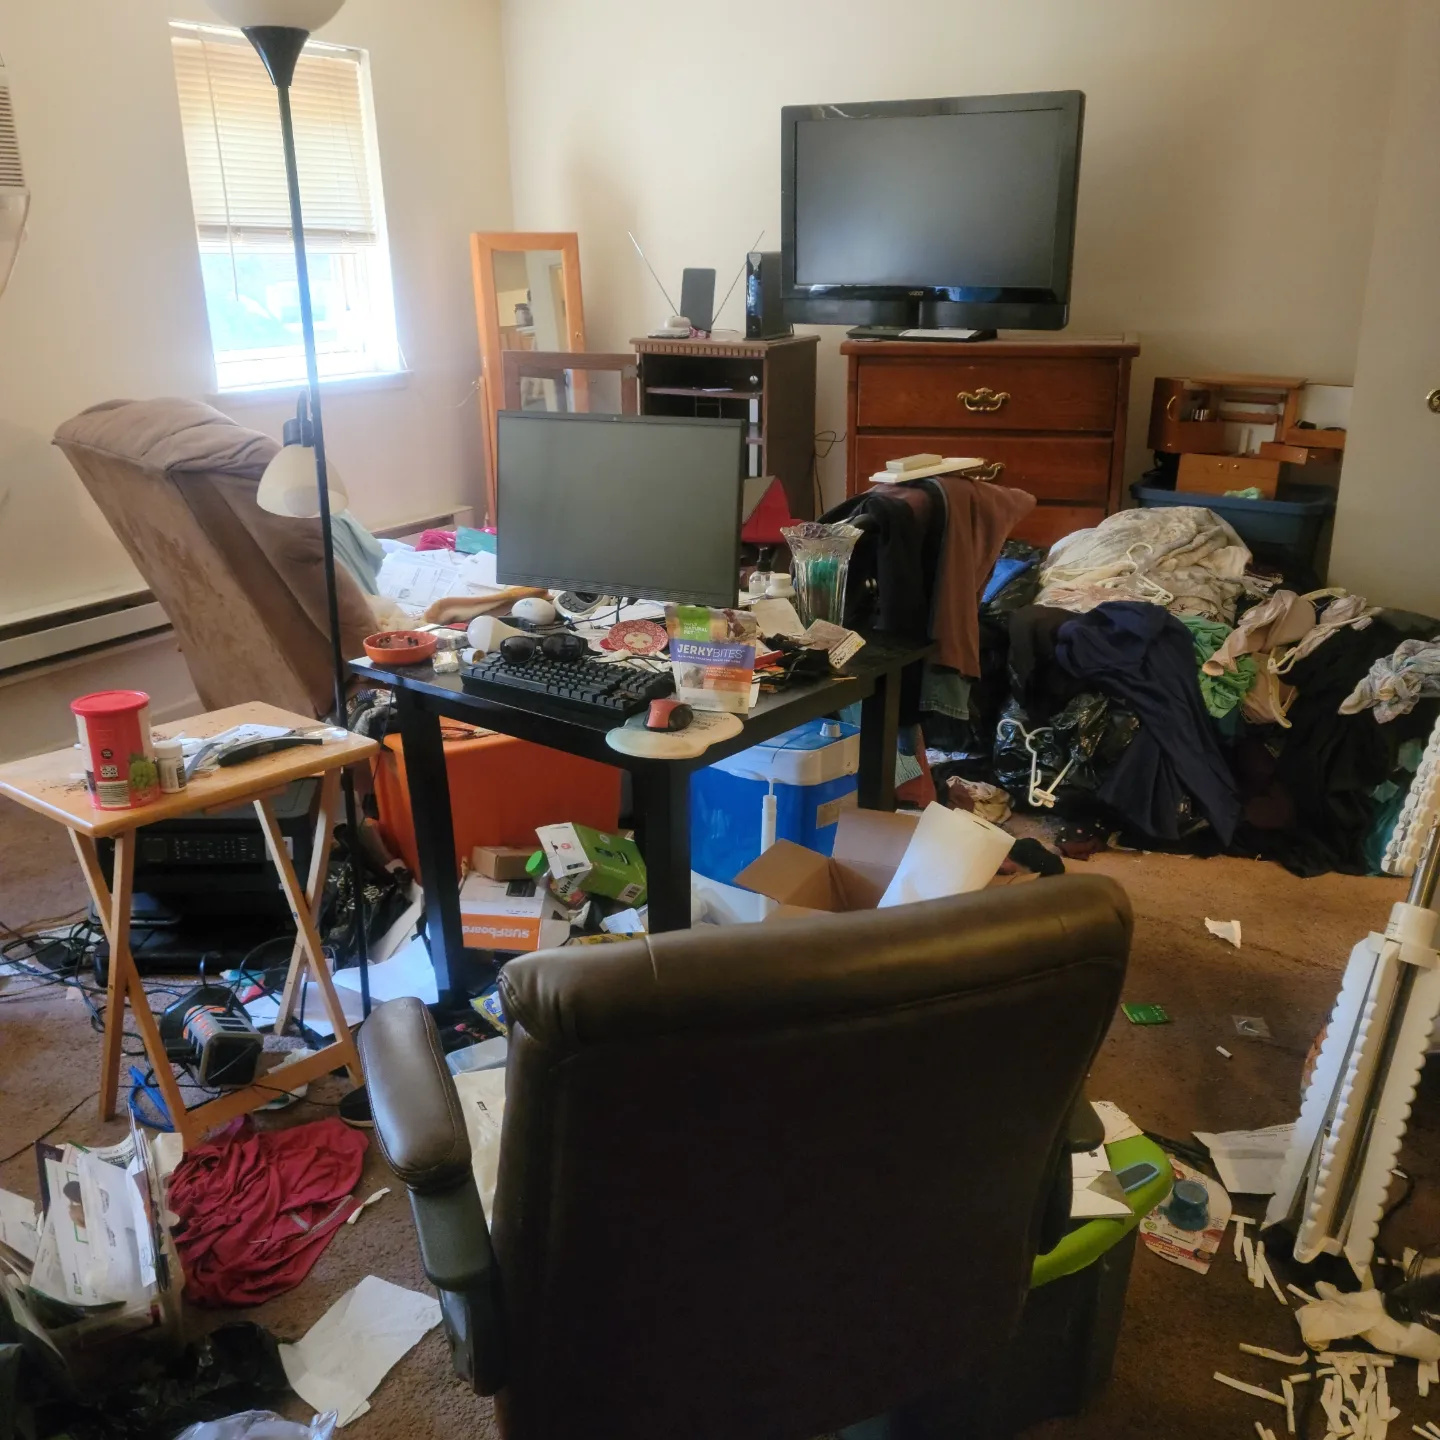 A dirty untidy house with clothes and trash